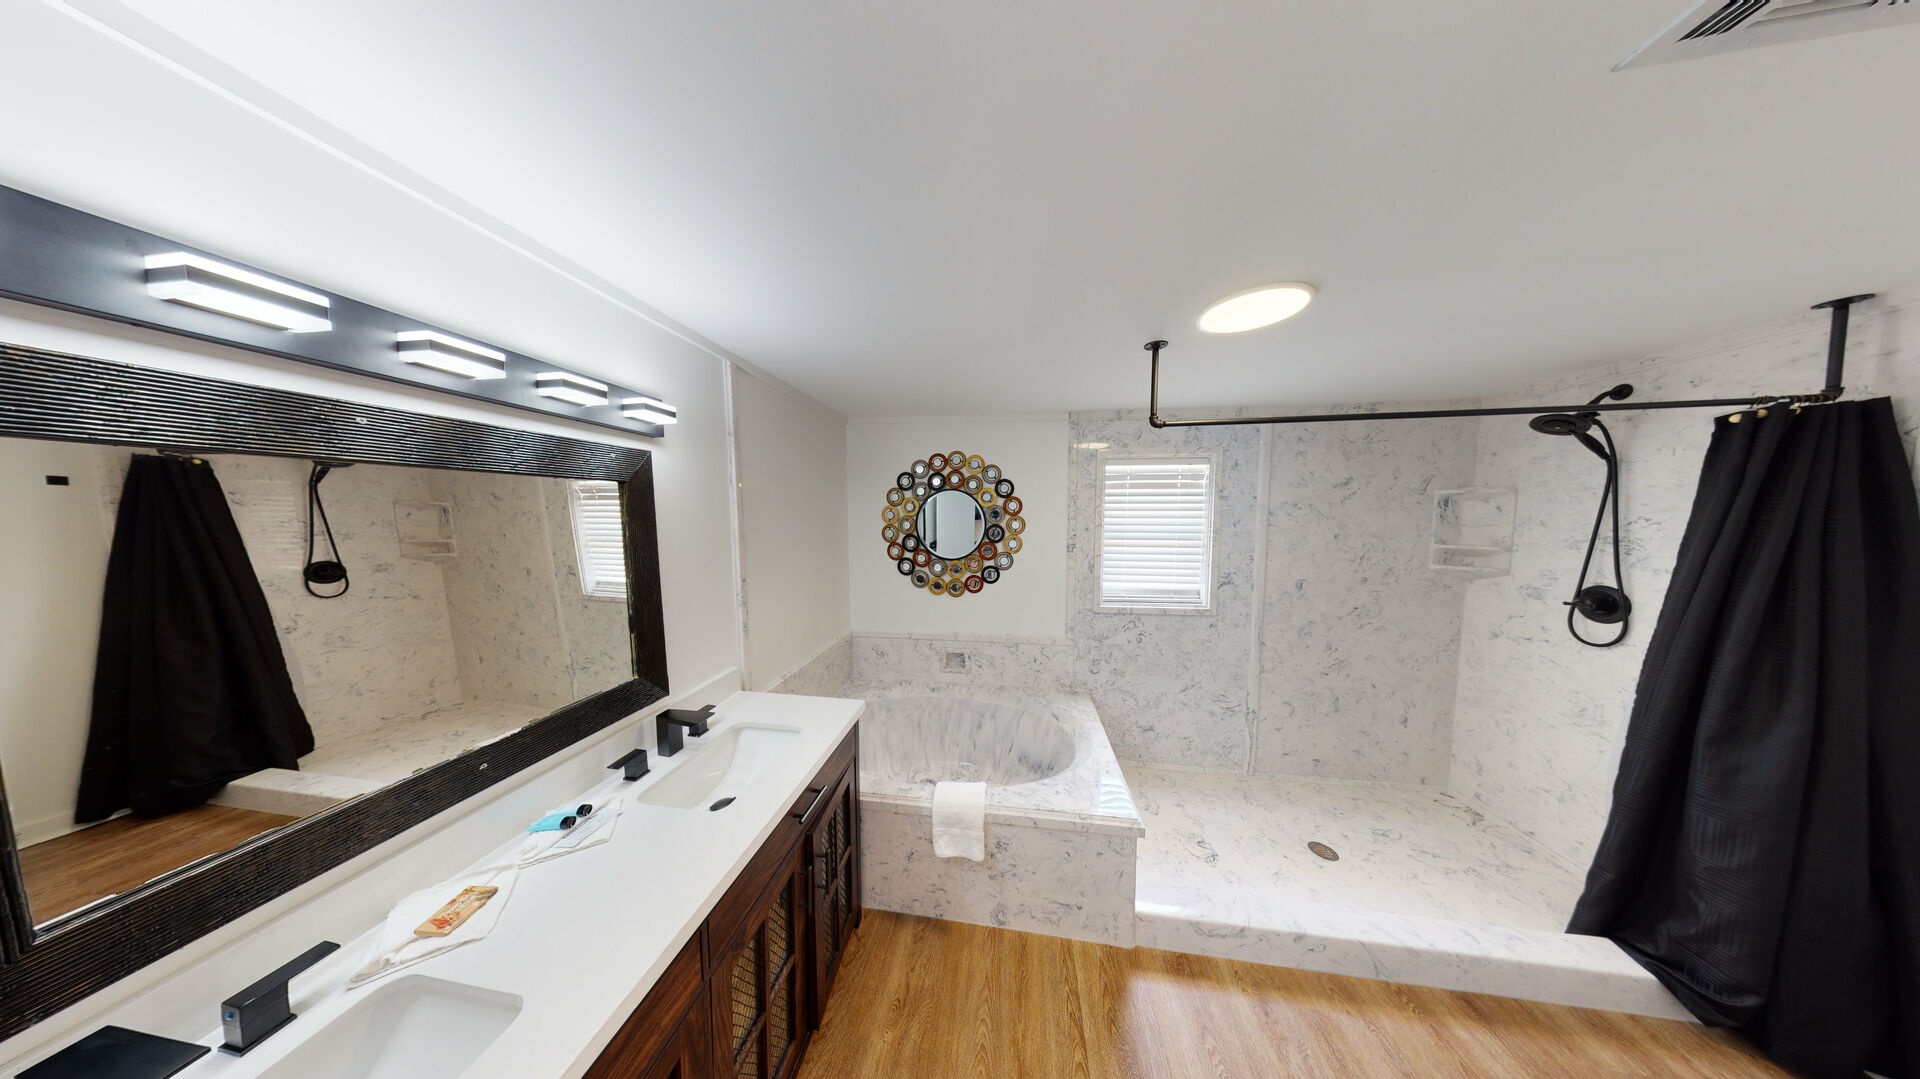 Master bath with double vanity, jacuzzi tub and walkin shower